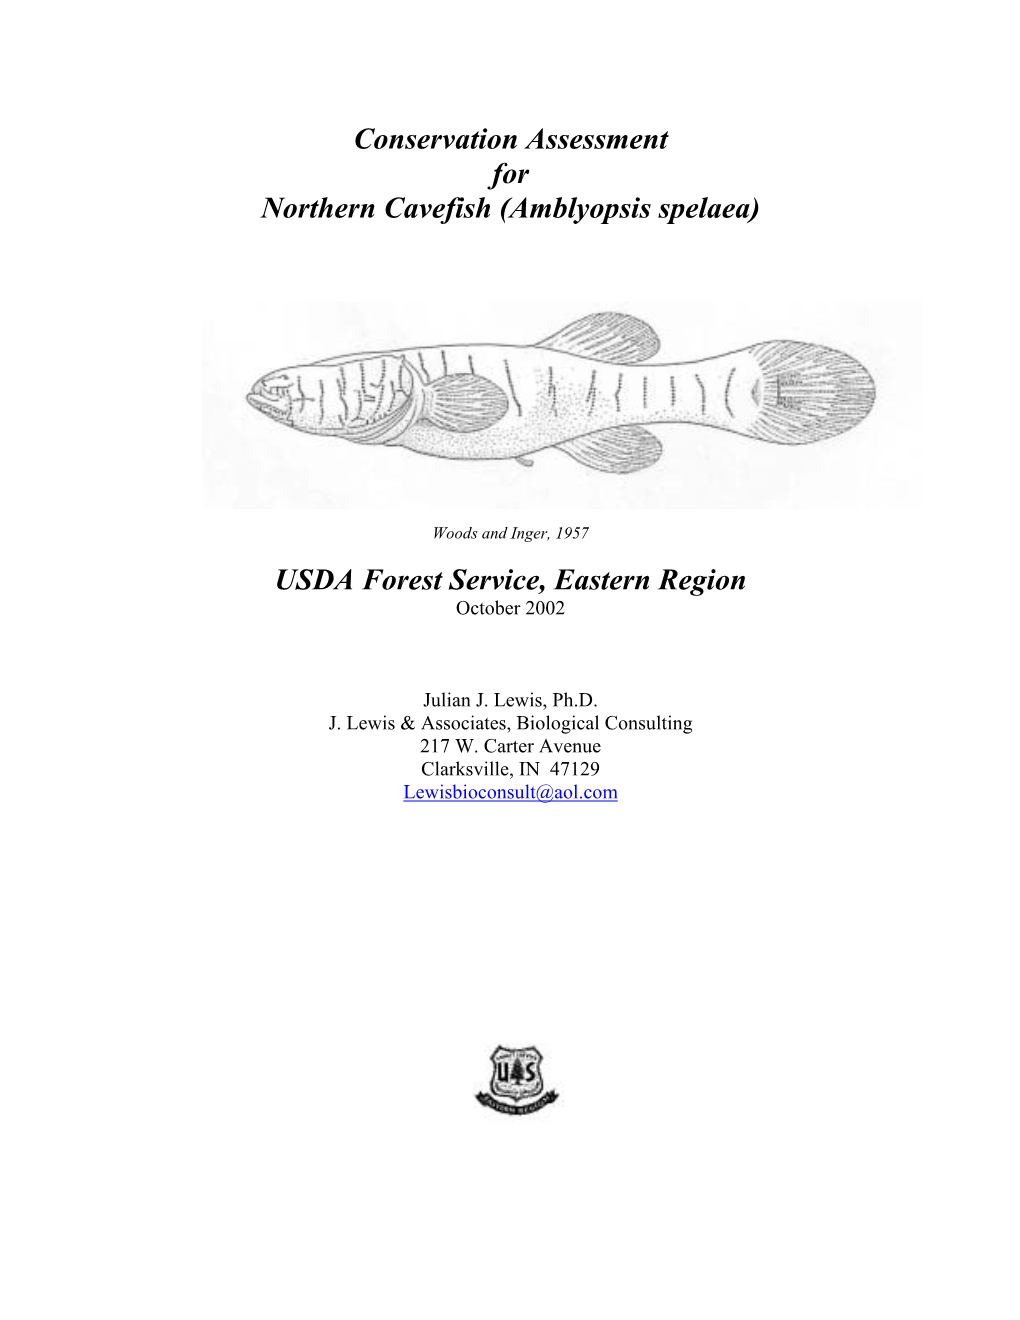 Conservation Assessment for Northern Cavefish (Amblyopsis Spelaea)